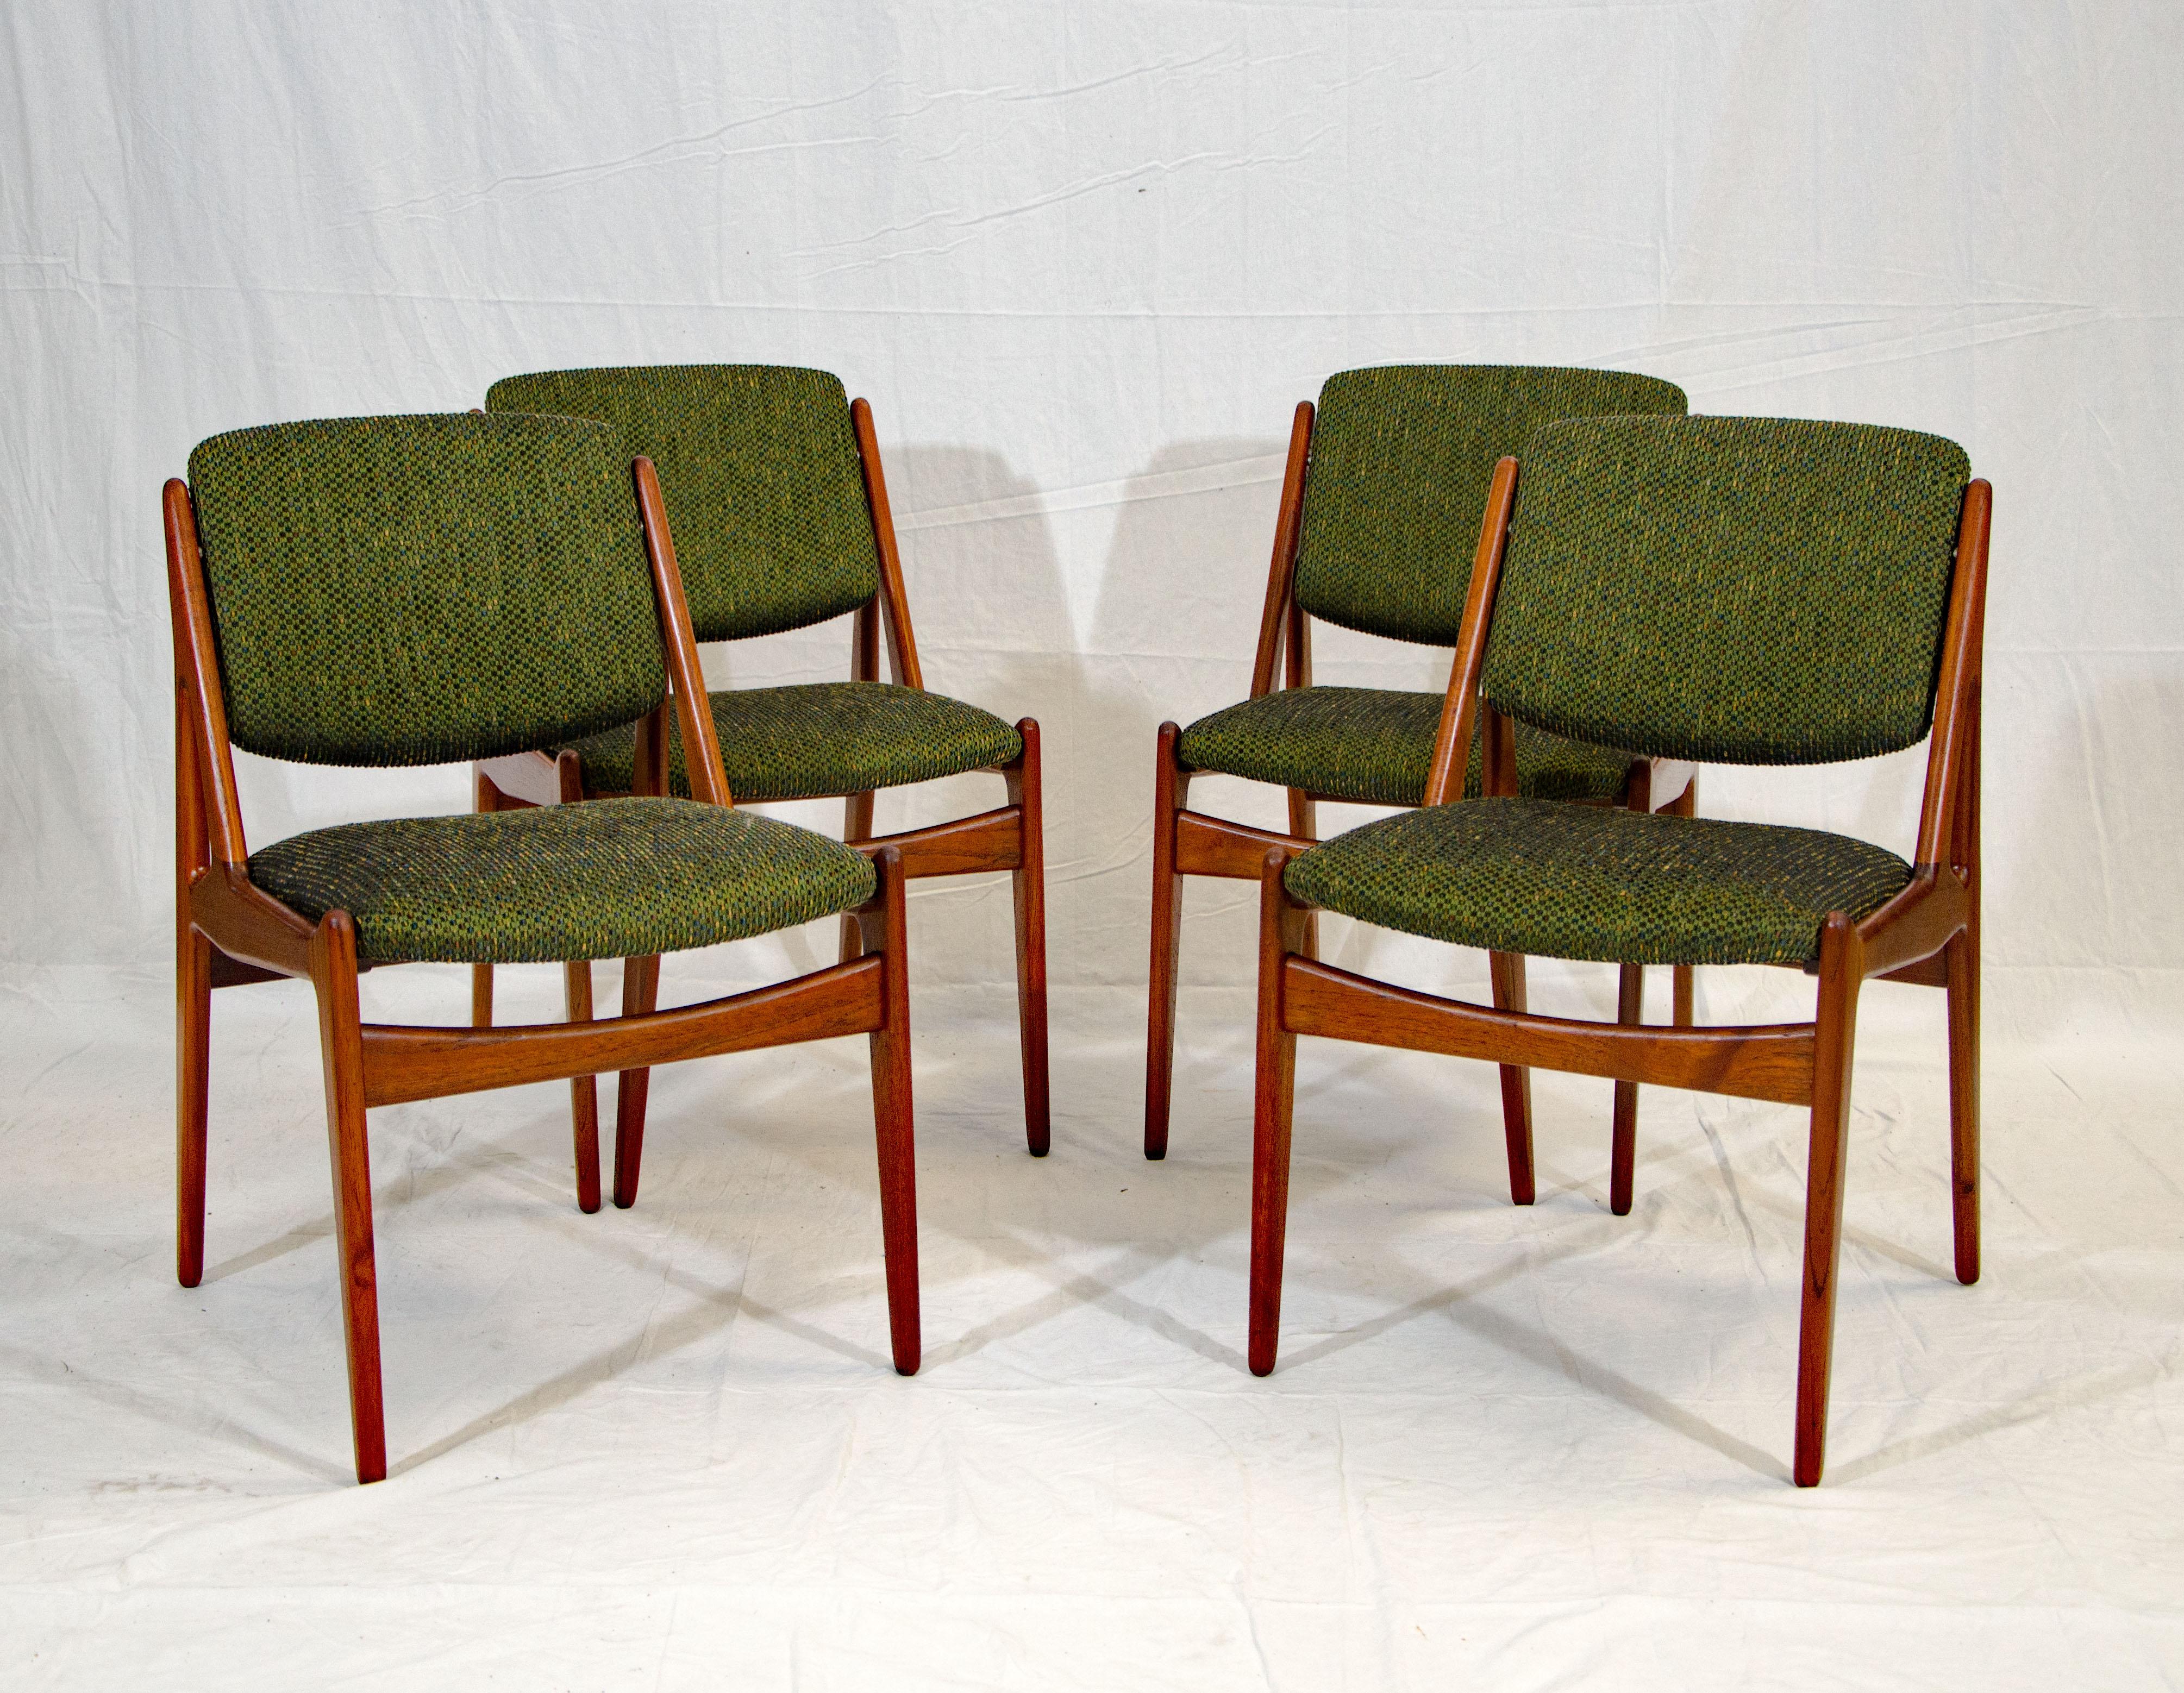 This set of four Danish teak Ella dining chairs have a great side profile and swiveling backs which adjust to your sitting position. They are sturdy and comfortable. The main fabric color is dark green with a few other color specks woven in.